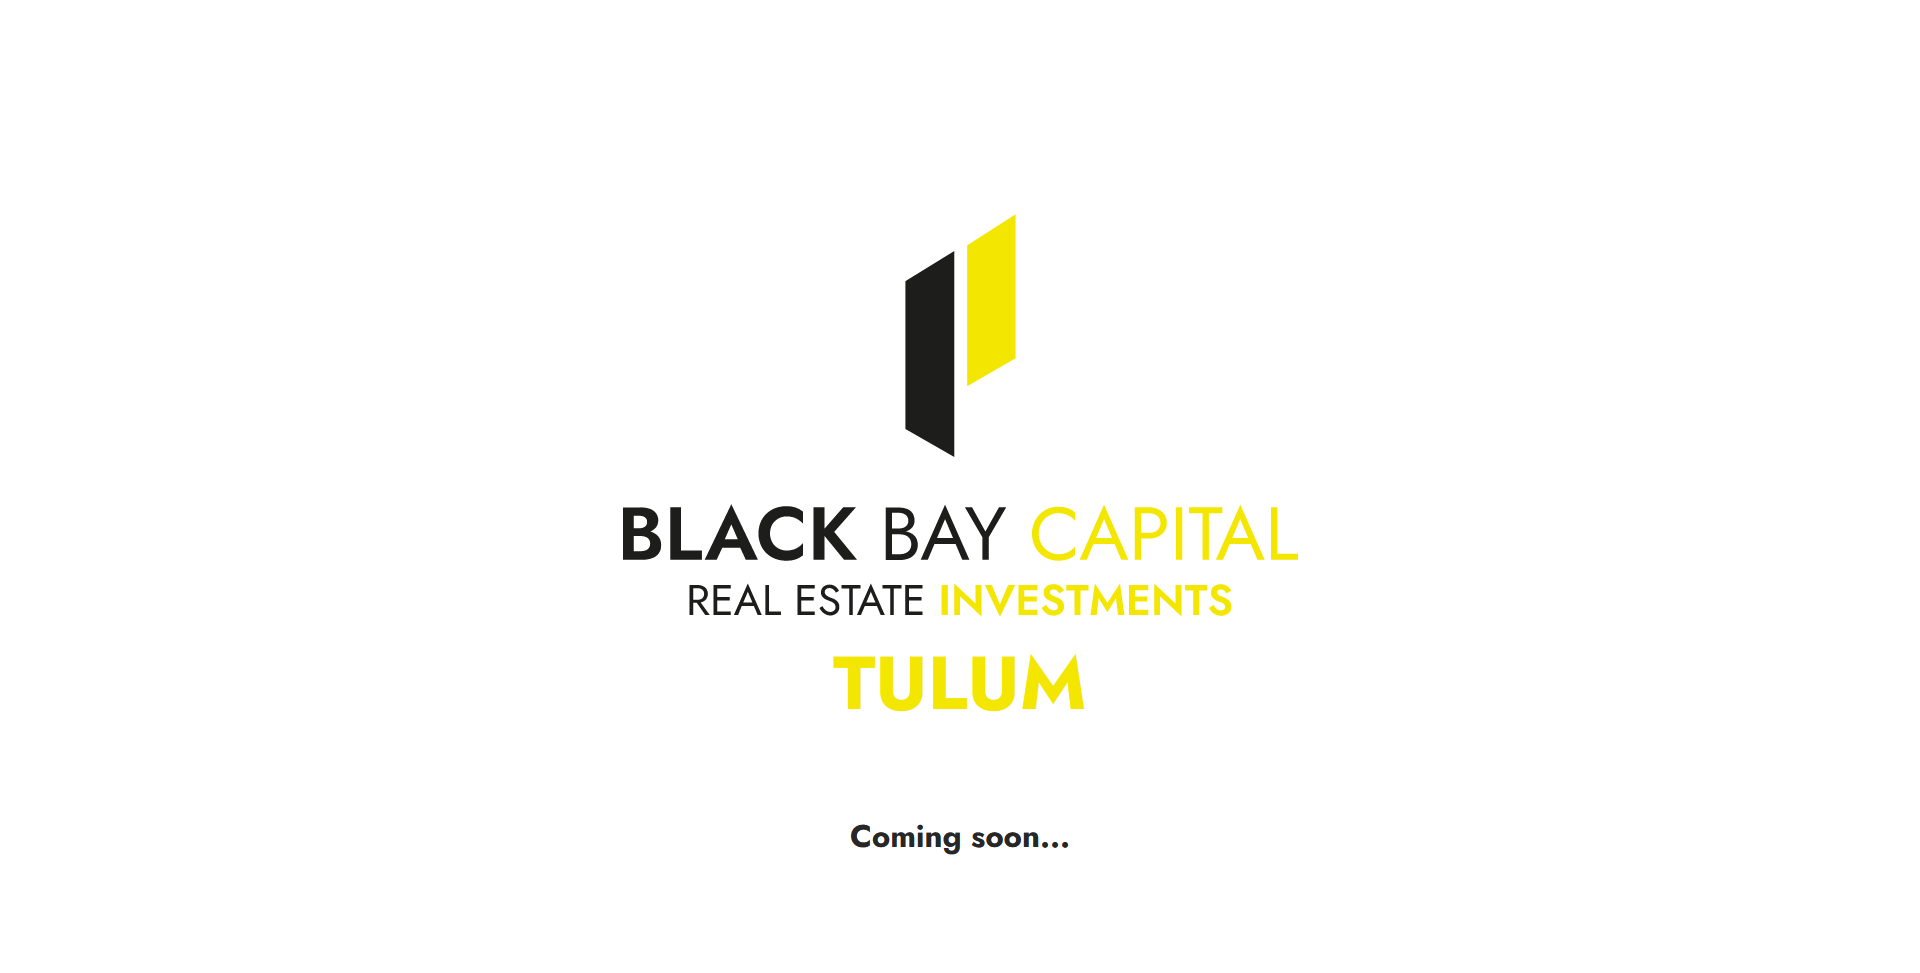 Black Bay Capital Real Estate Investments